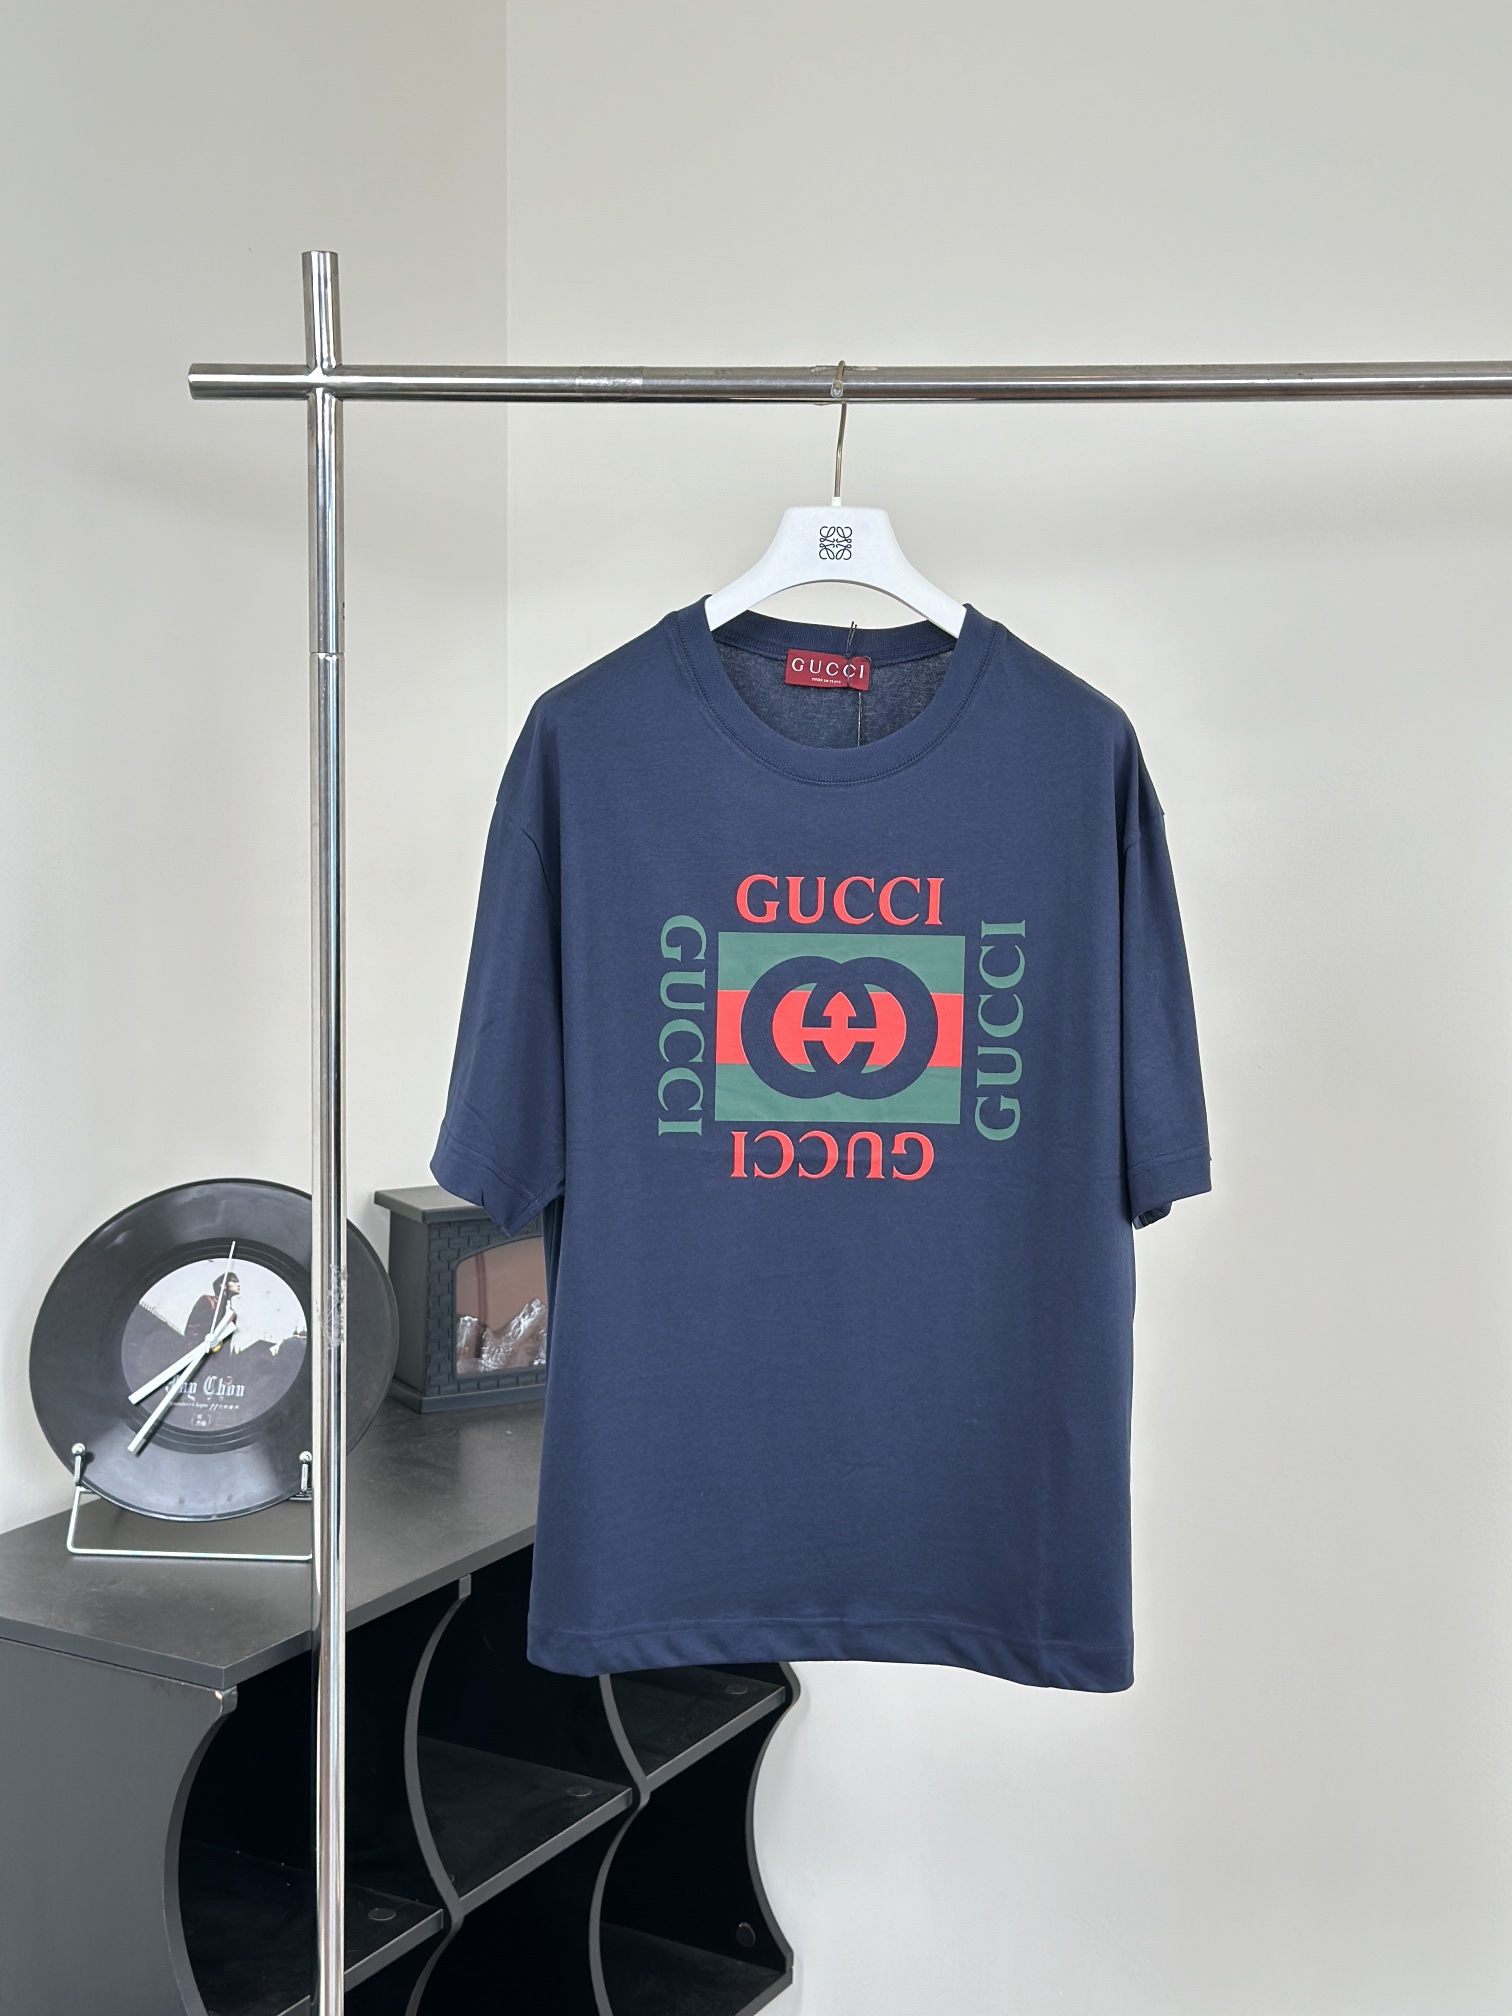 Gucci Clothing T-Shirt Printing Cotton Knitted Knitting Spring/Summer Collection Vintage Short Sleeve